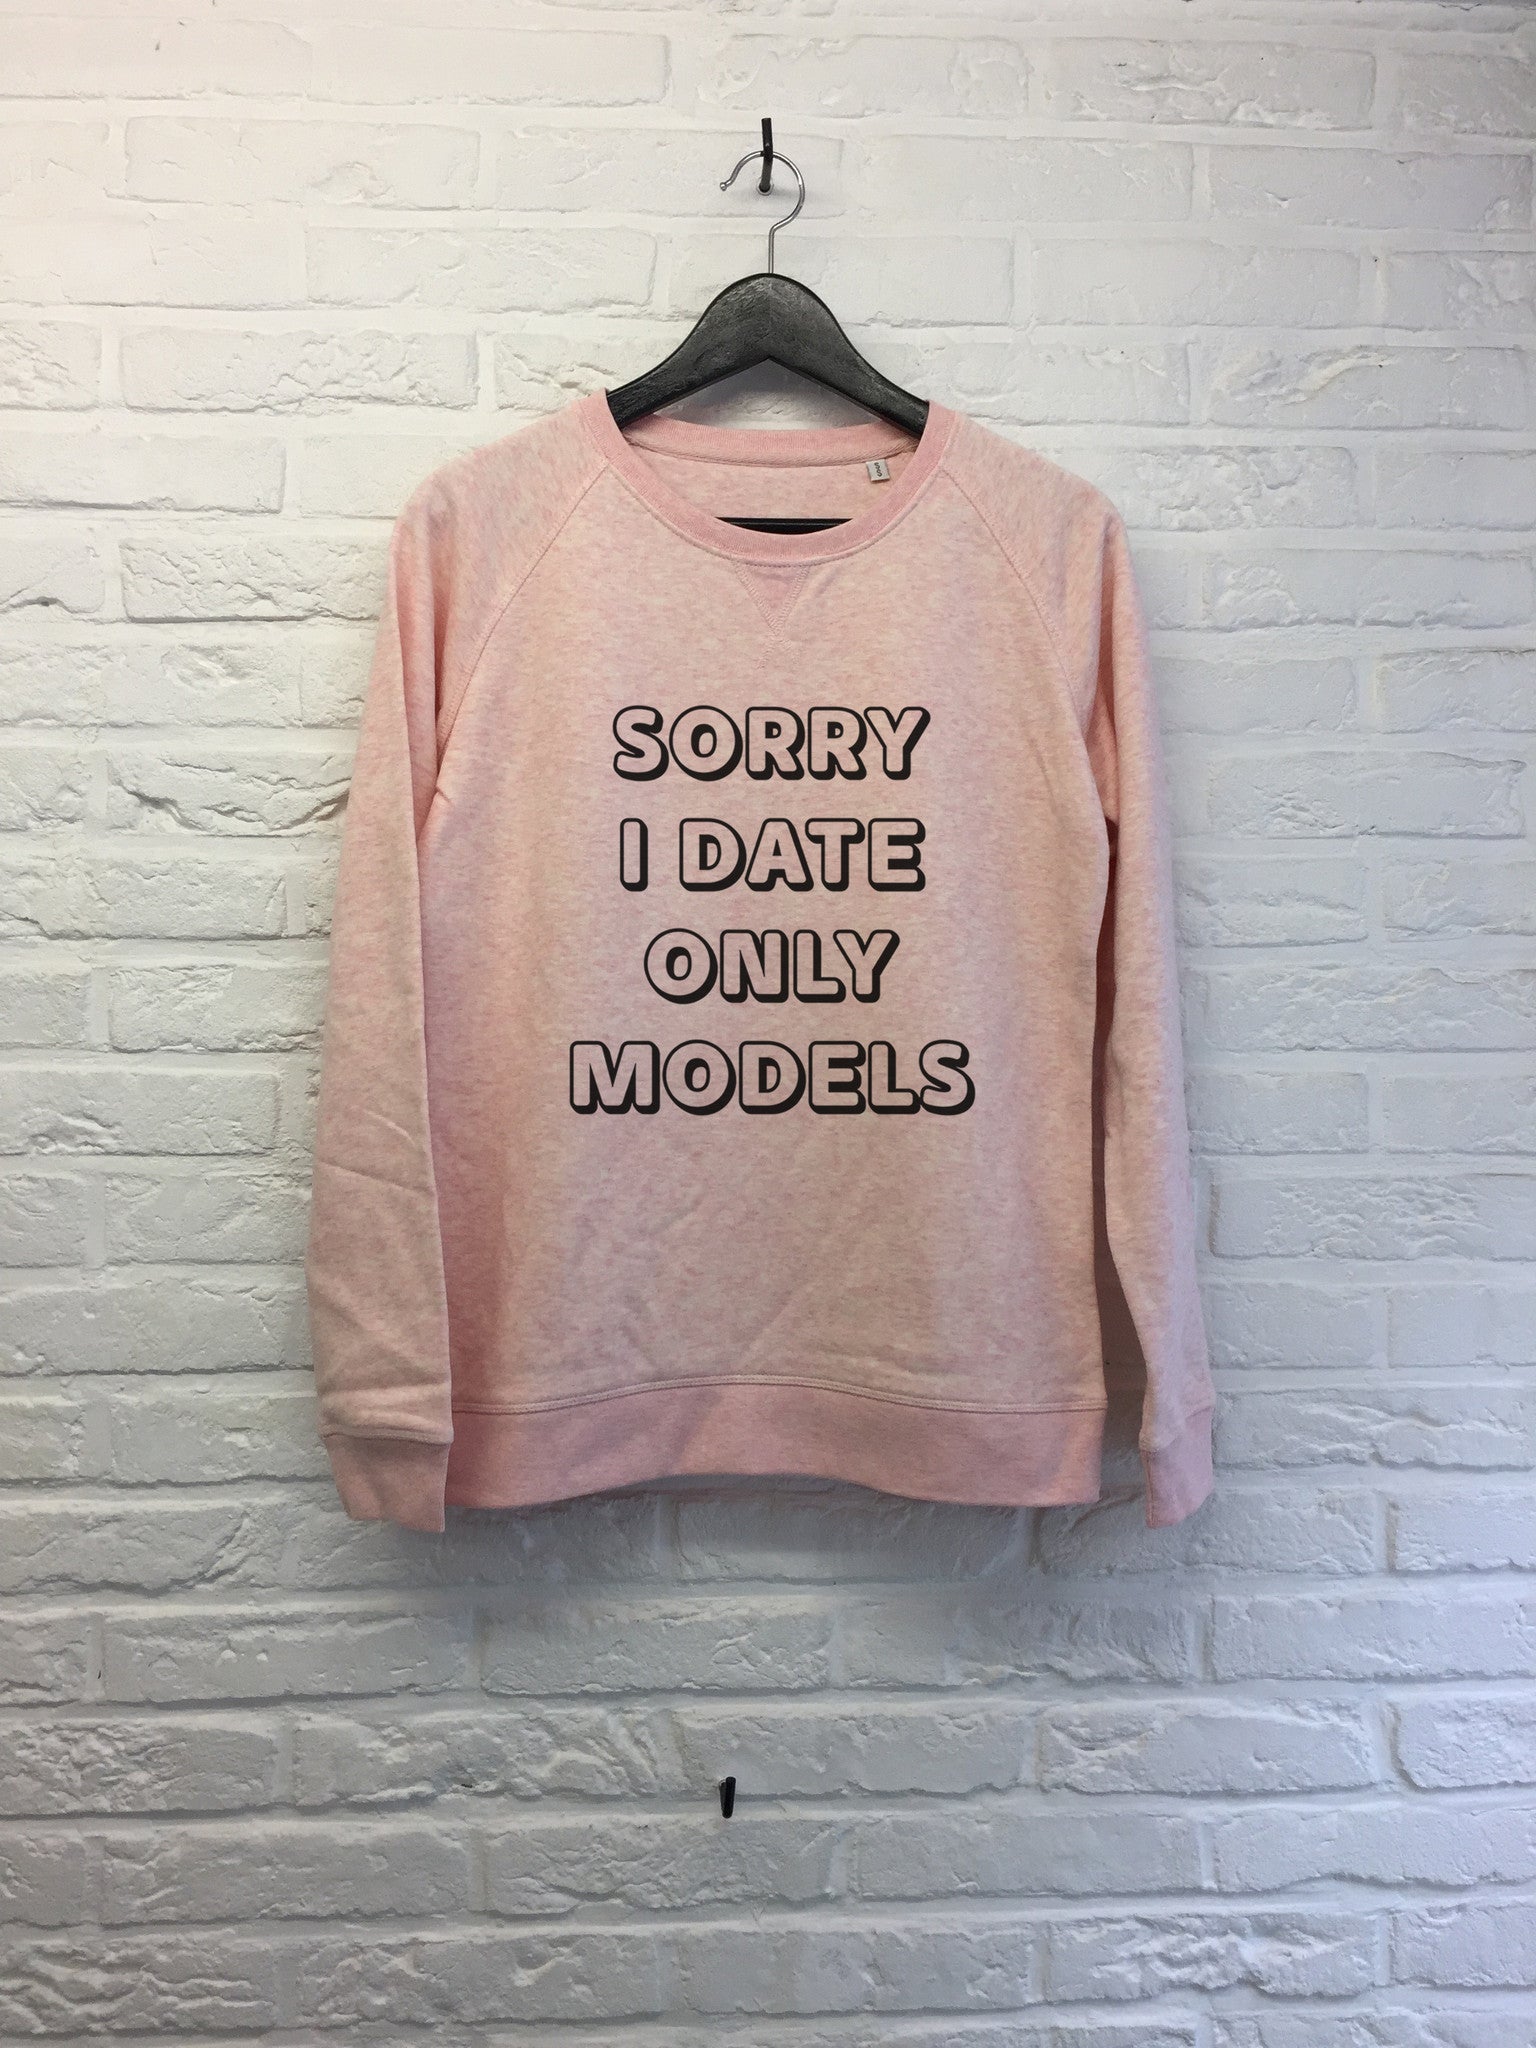 Sorry I date only models - Sweat - Femme-Sweat shirts-Atelier Amelot